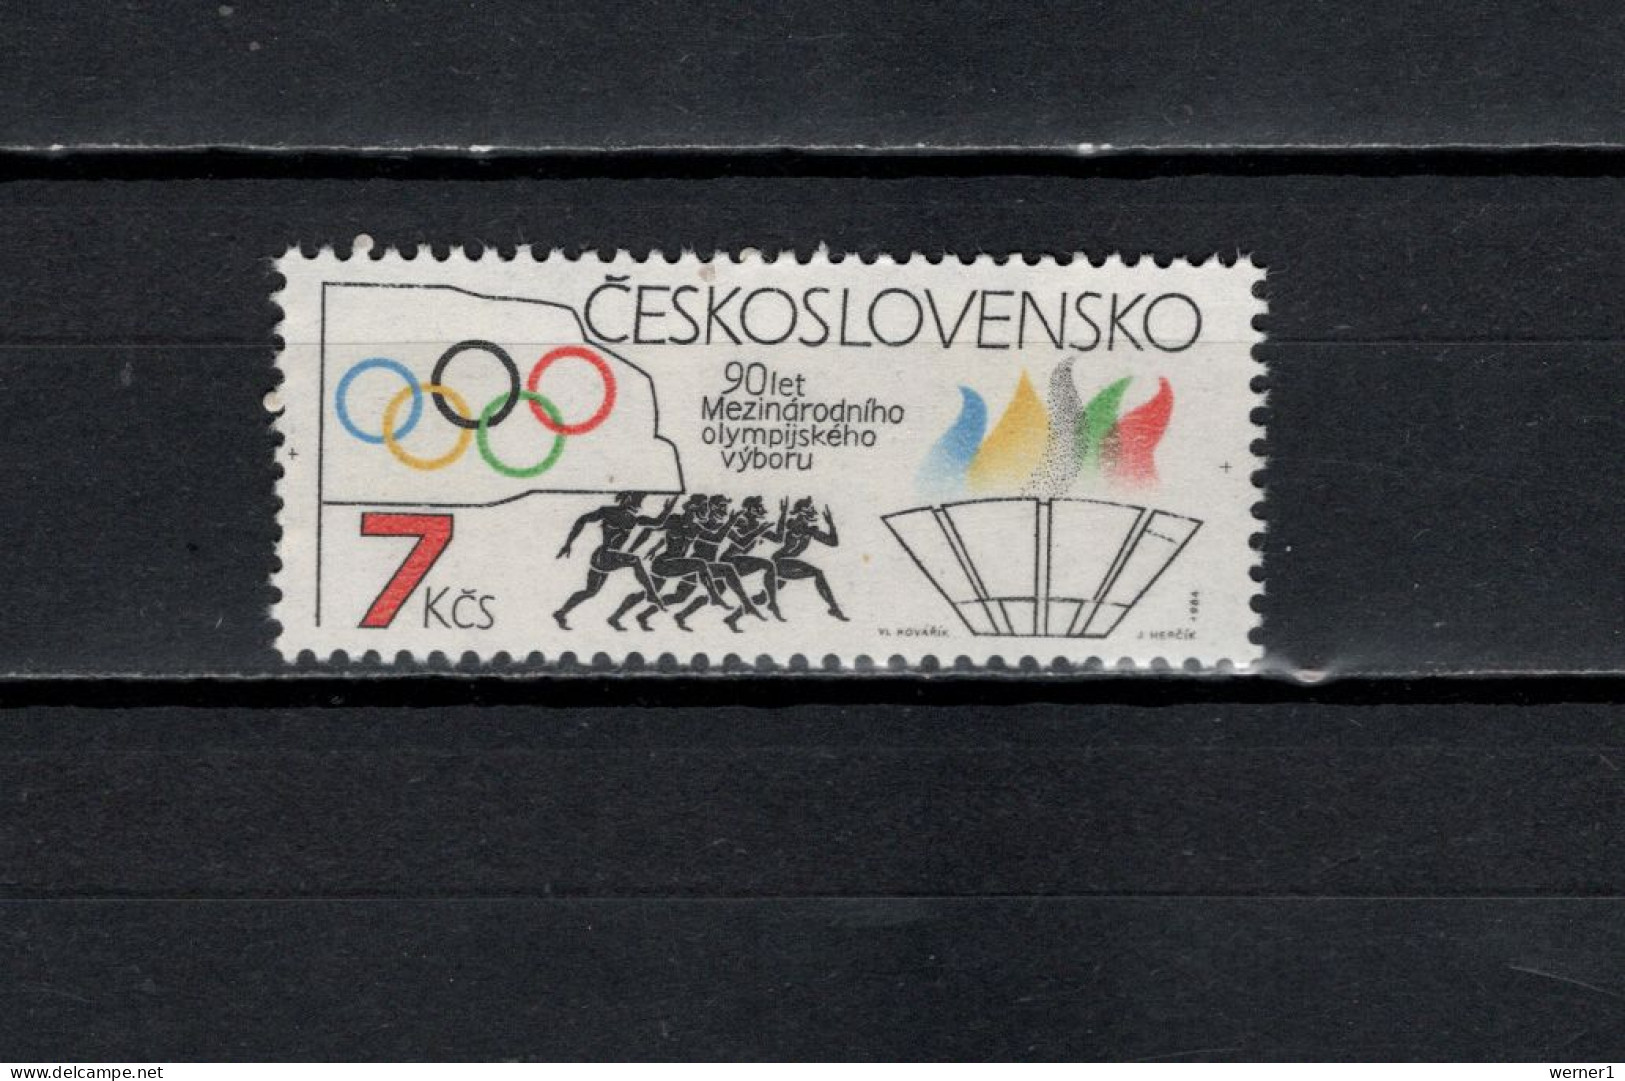 Czechoslovakia 1984 Olympic Games Stamp MNH - Summer 1984: Los Angeles